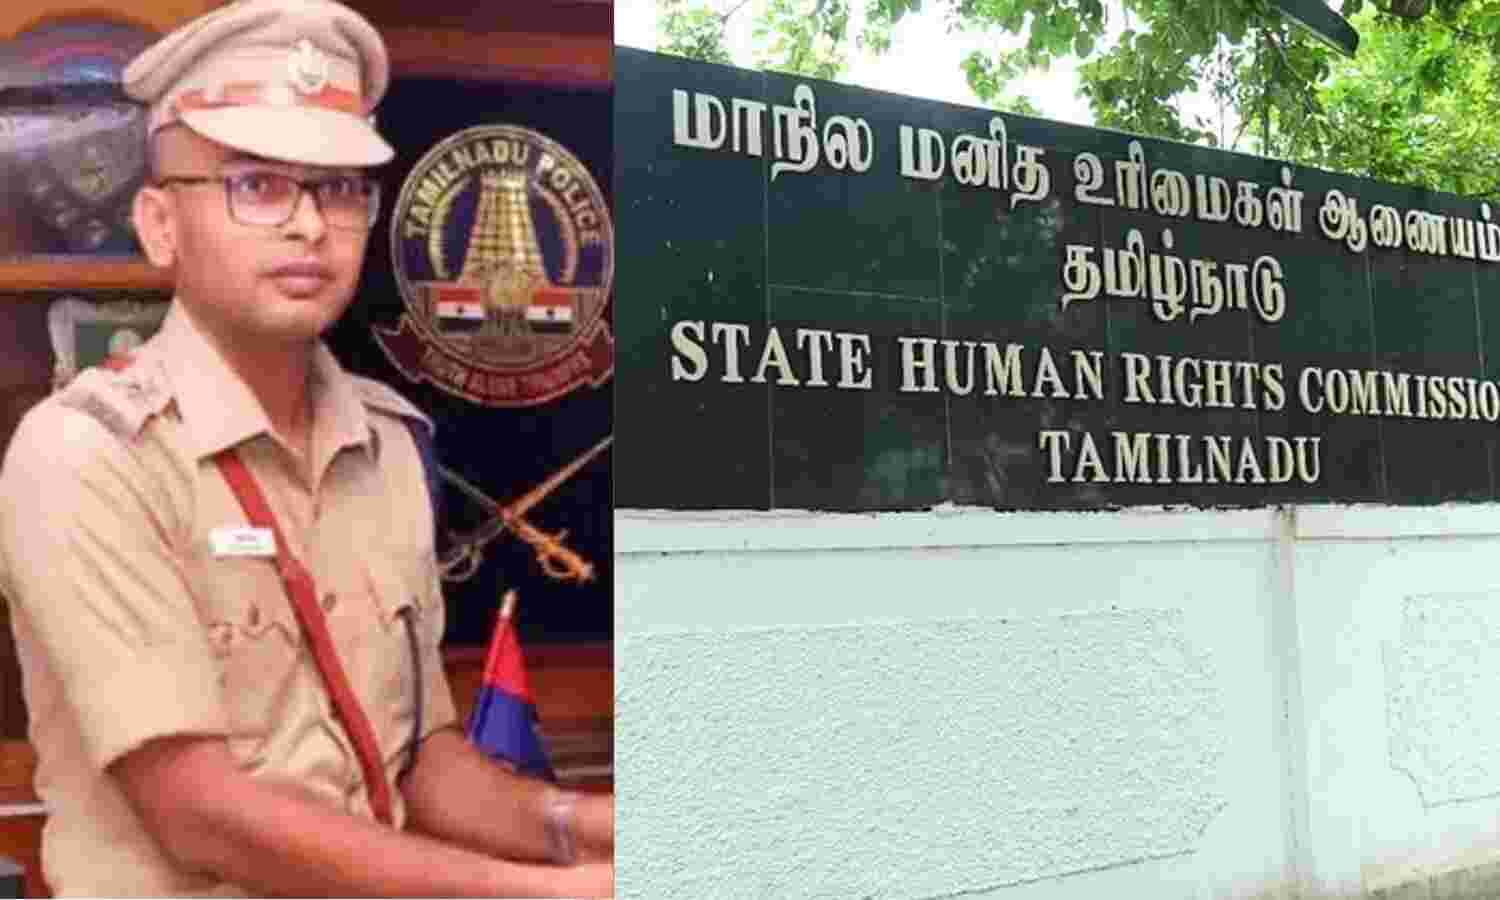 Pulled teeth with pliers, stones: Ambasamudram cop now faces SHRC probe